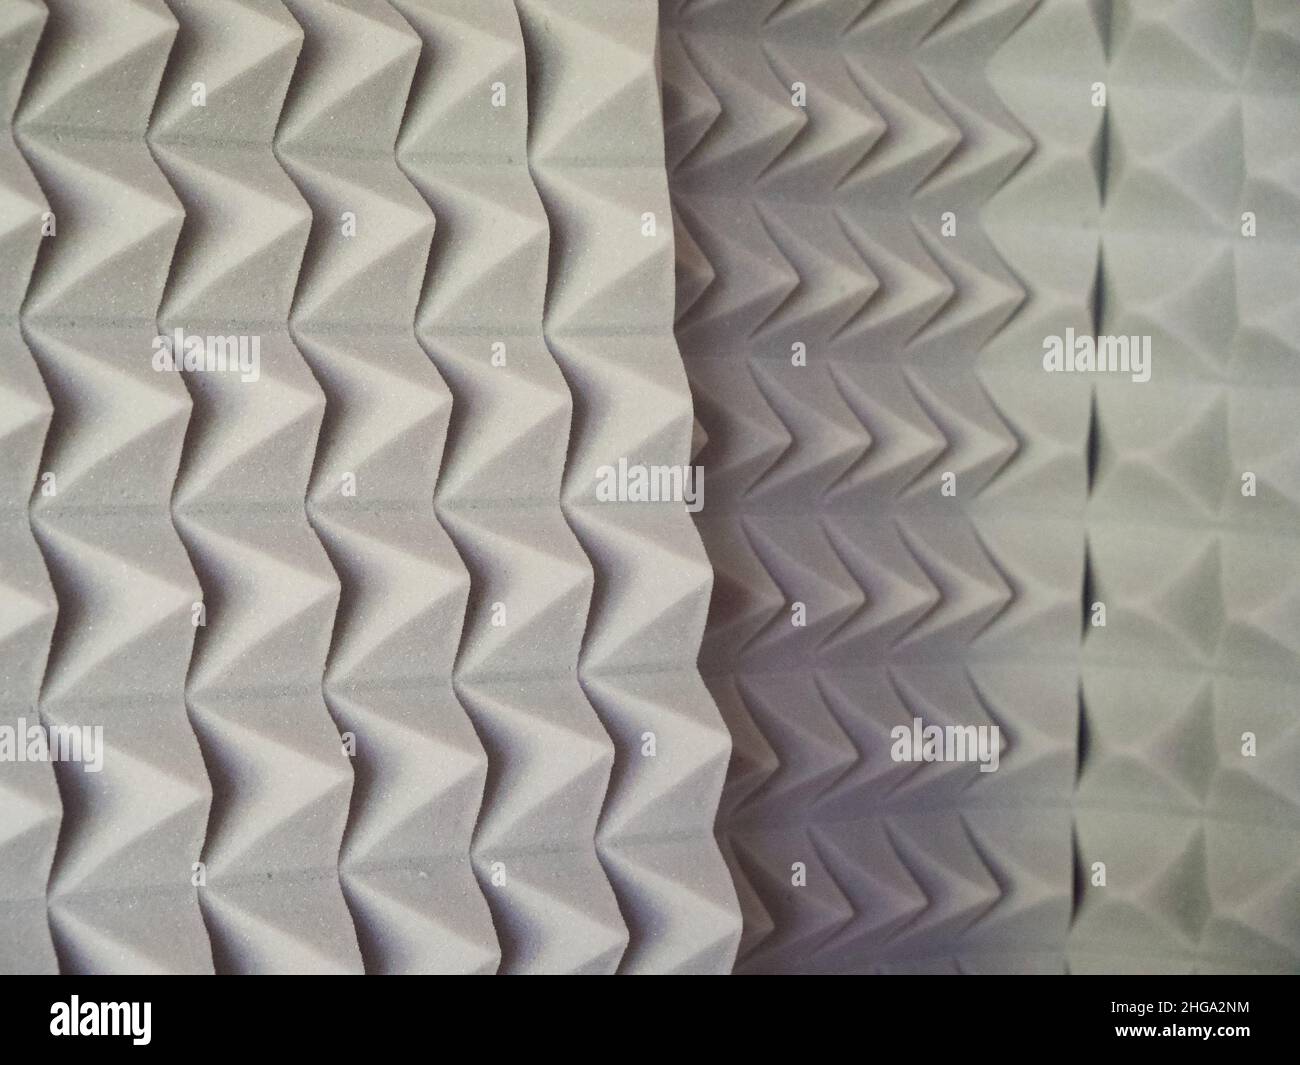 Plates of gray soundproof foam rubber. Sound-absorbing material. Stock Photo